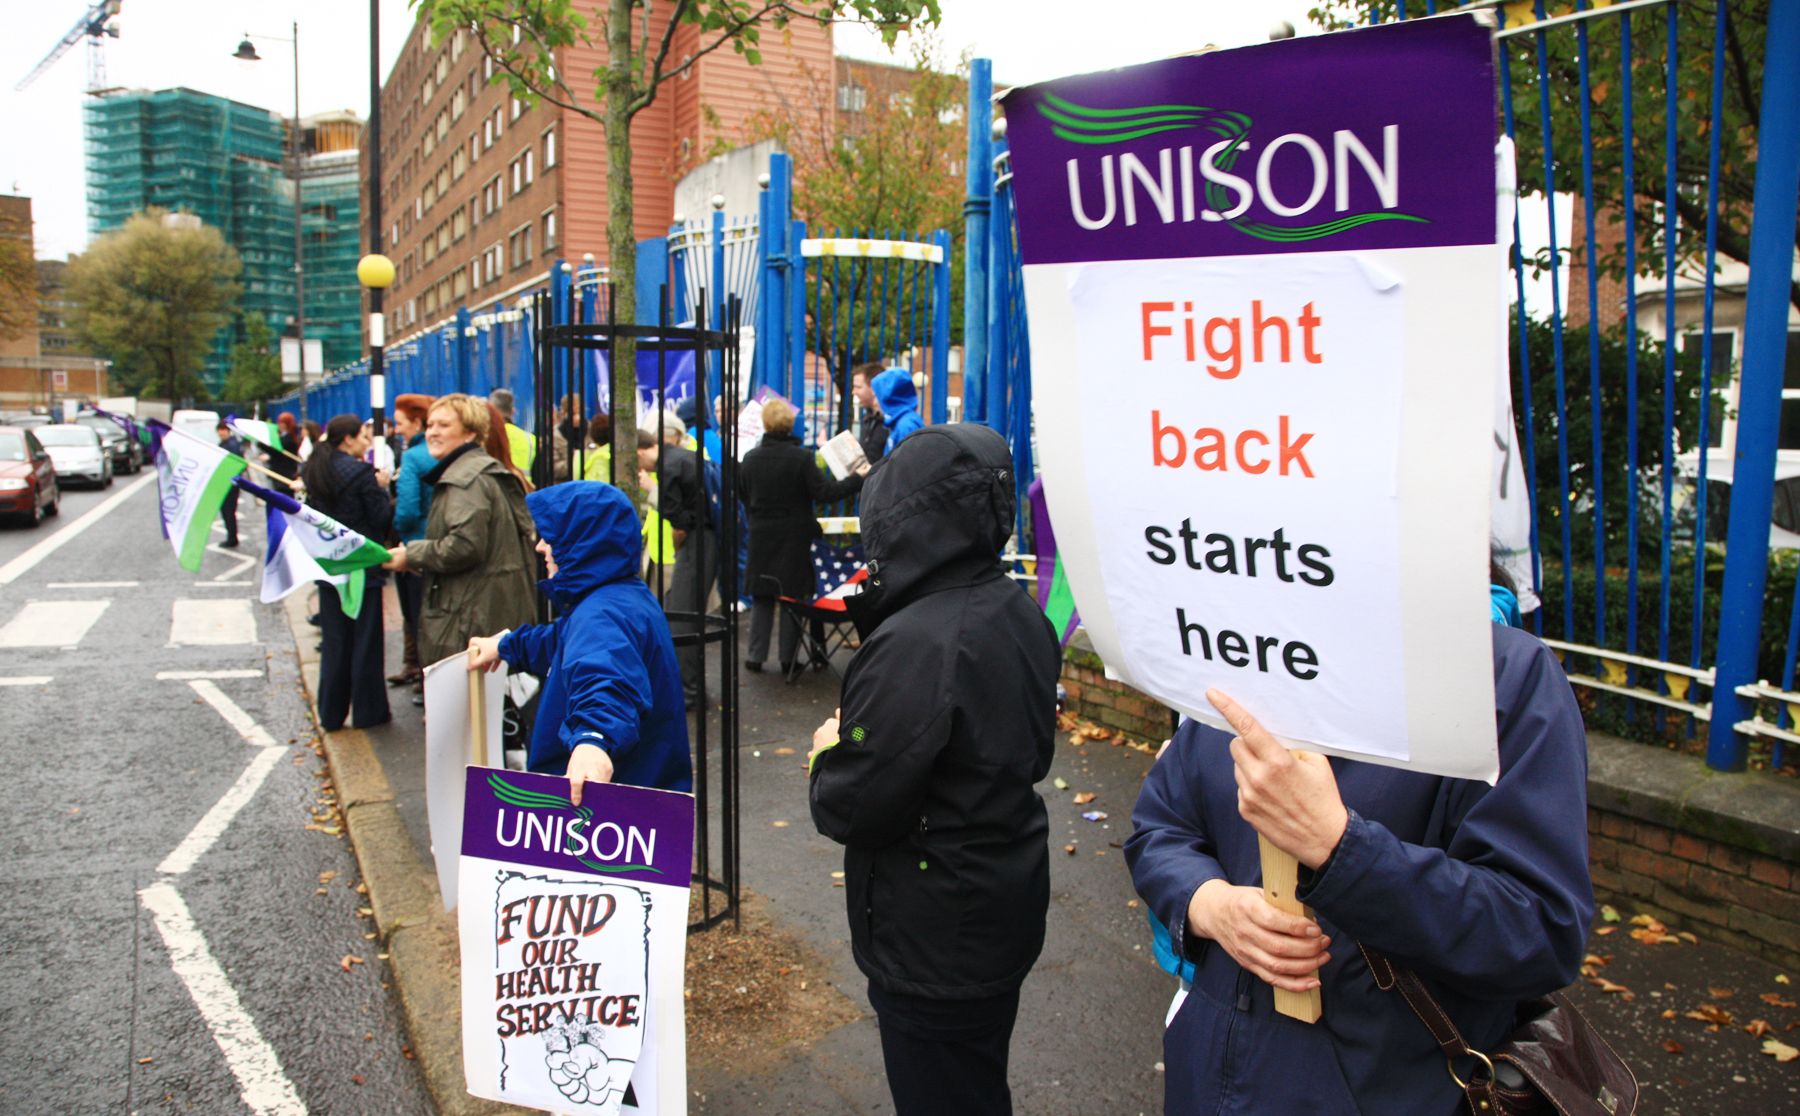 UNION FEARS: UNISON calls on Education Authority to mitigate Covid risks to workers